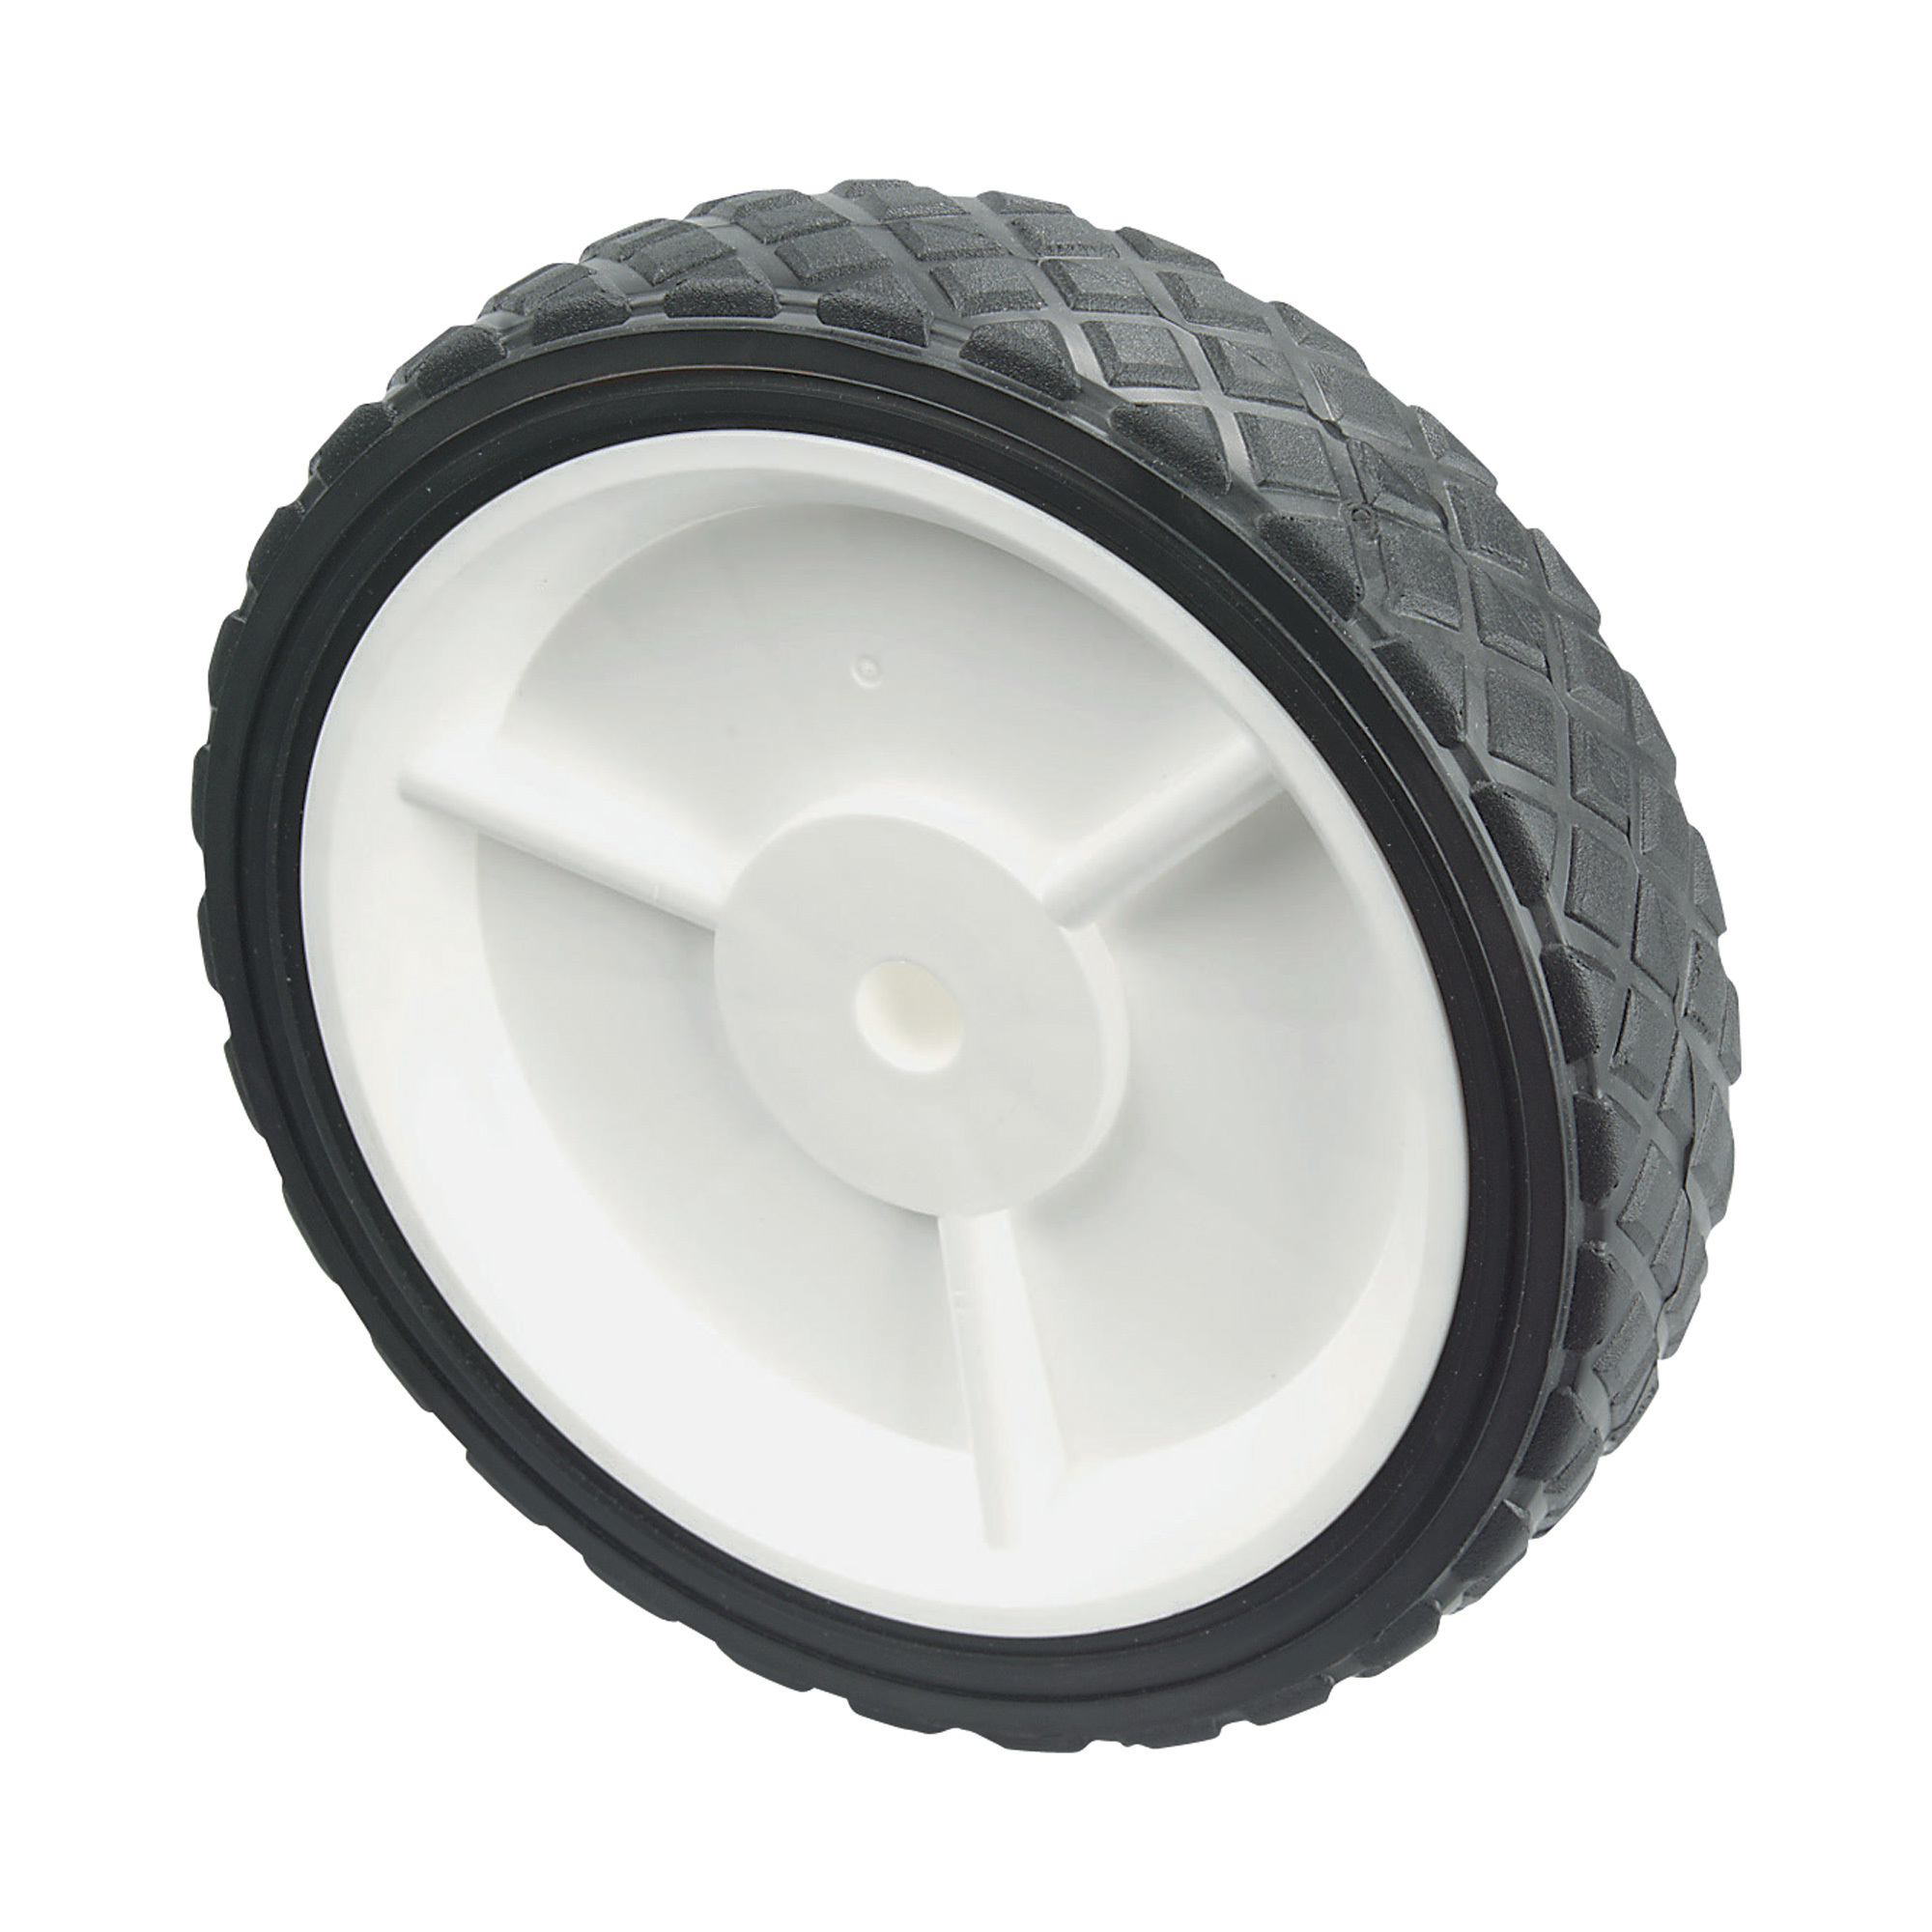 3-Spoke Plastic Wheel and Hub with Rubber Tire â 6Inch x 1.5Inch